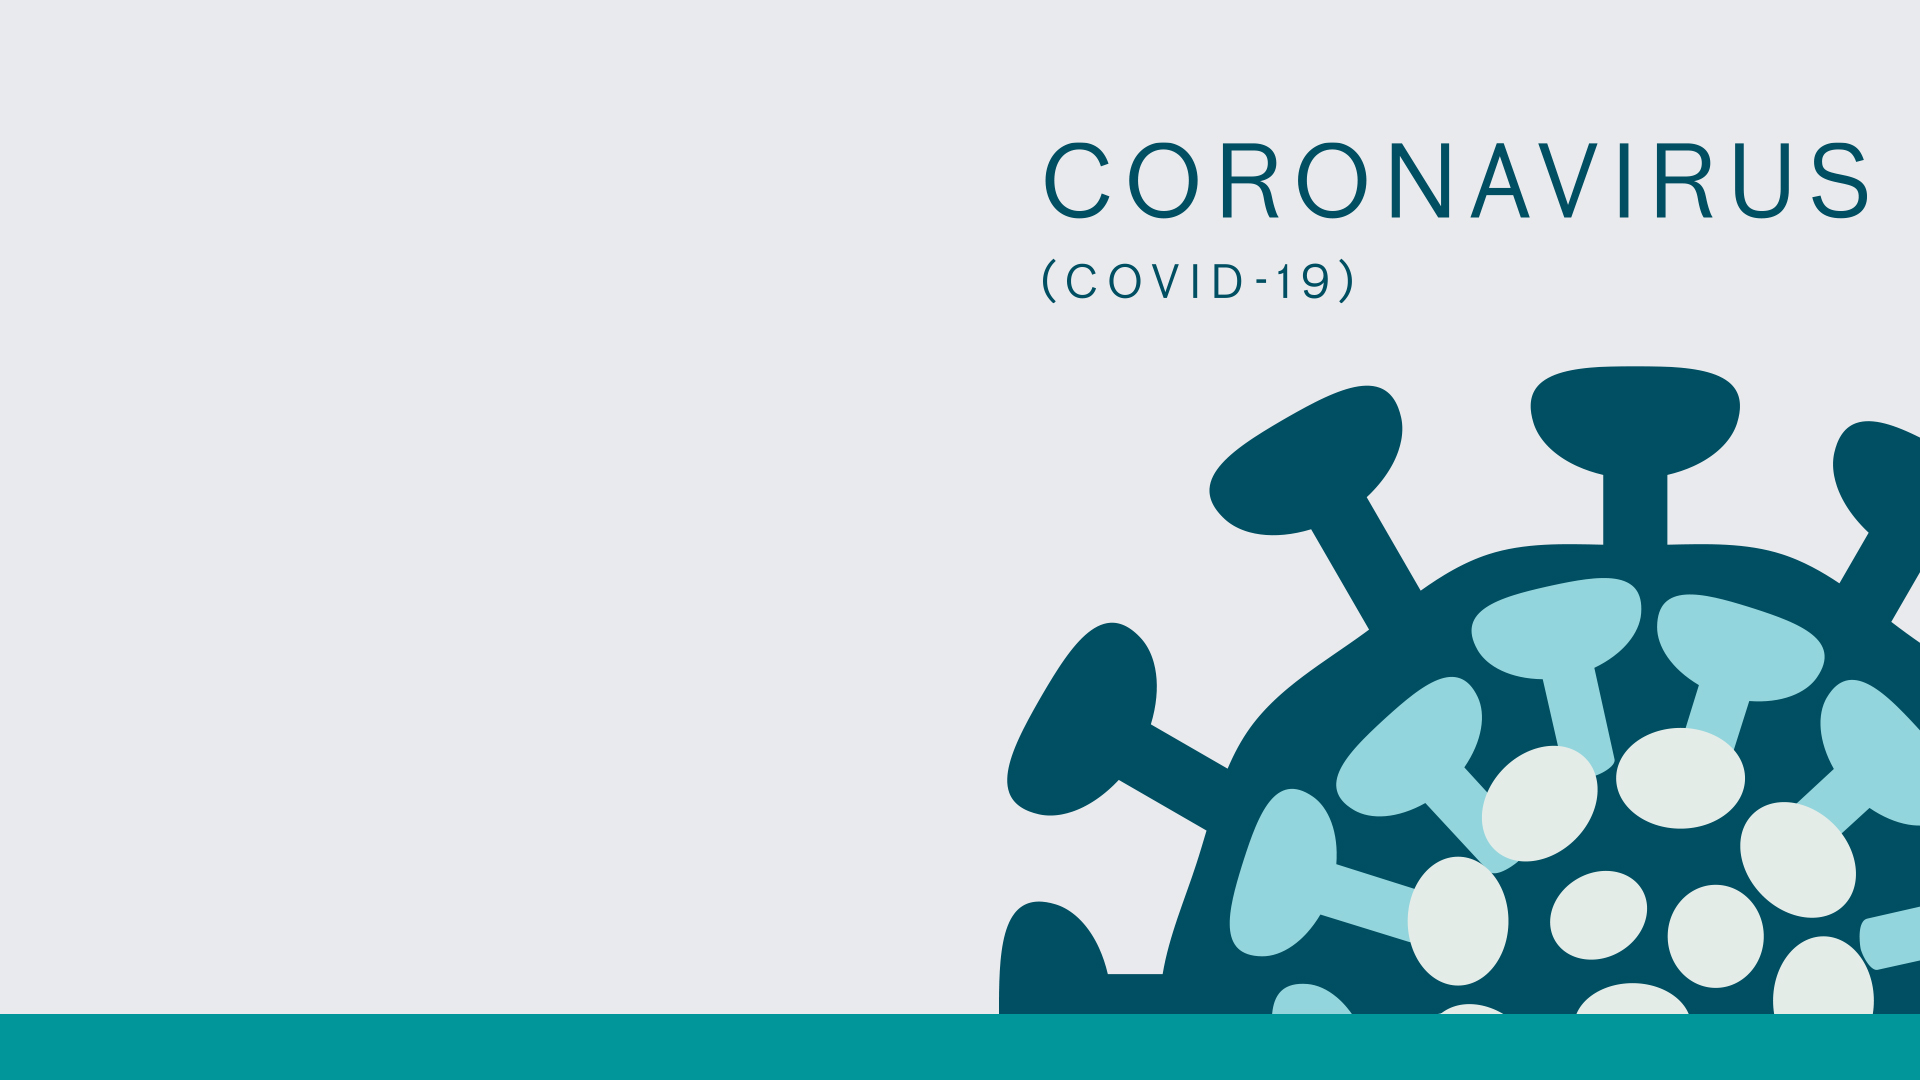 Learn how to keep your employees healthy during the spread of coronavirus disease 2019 (COVID-19).